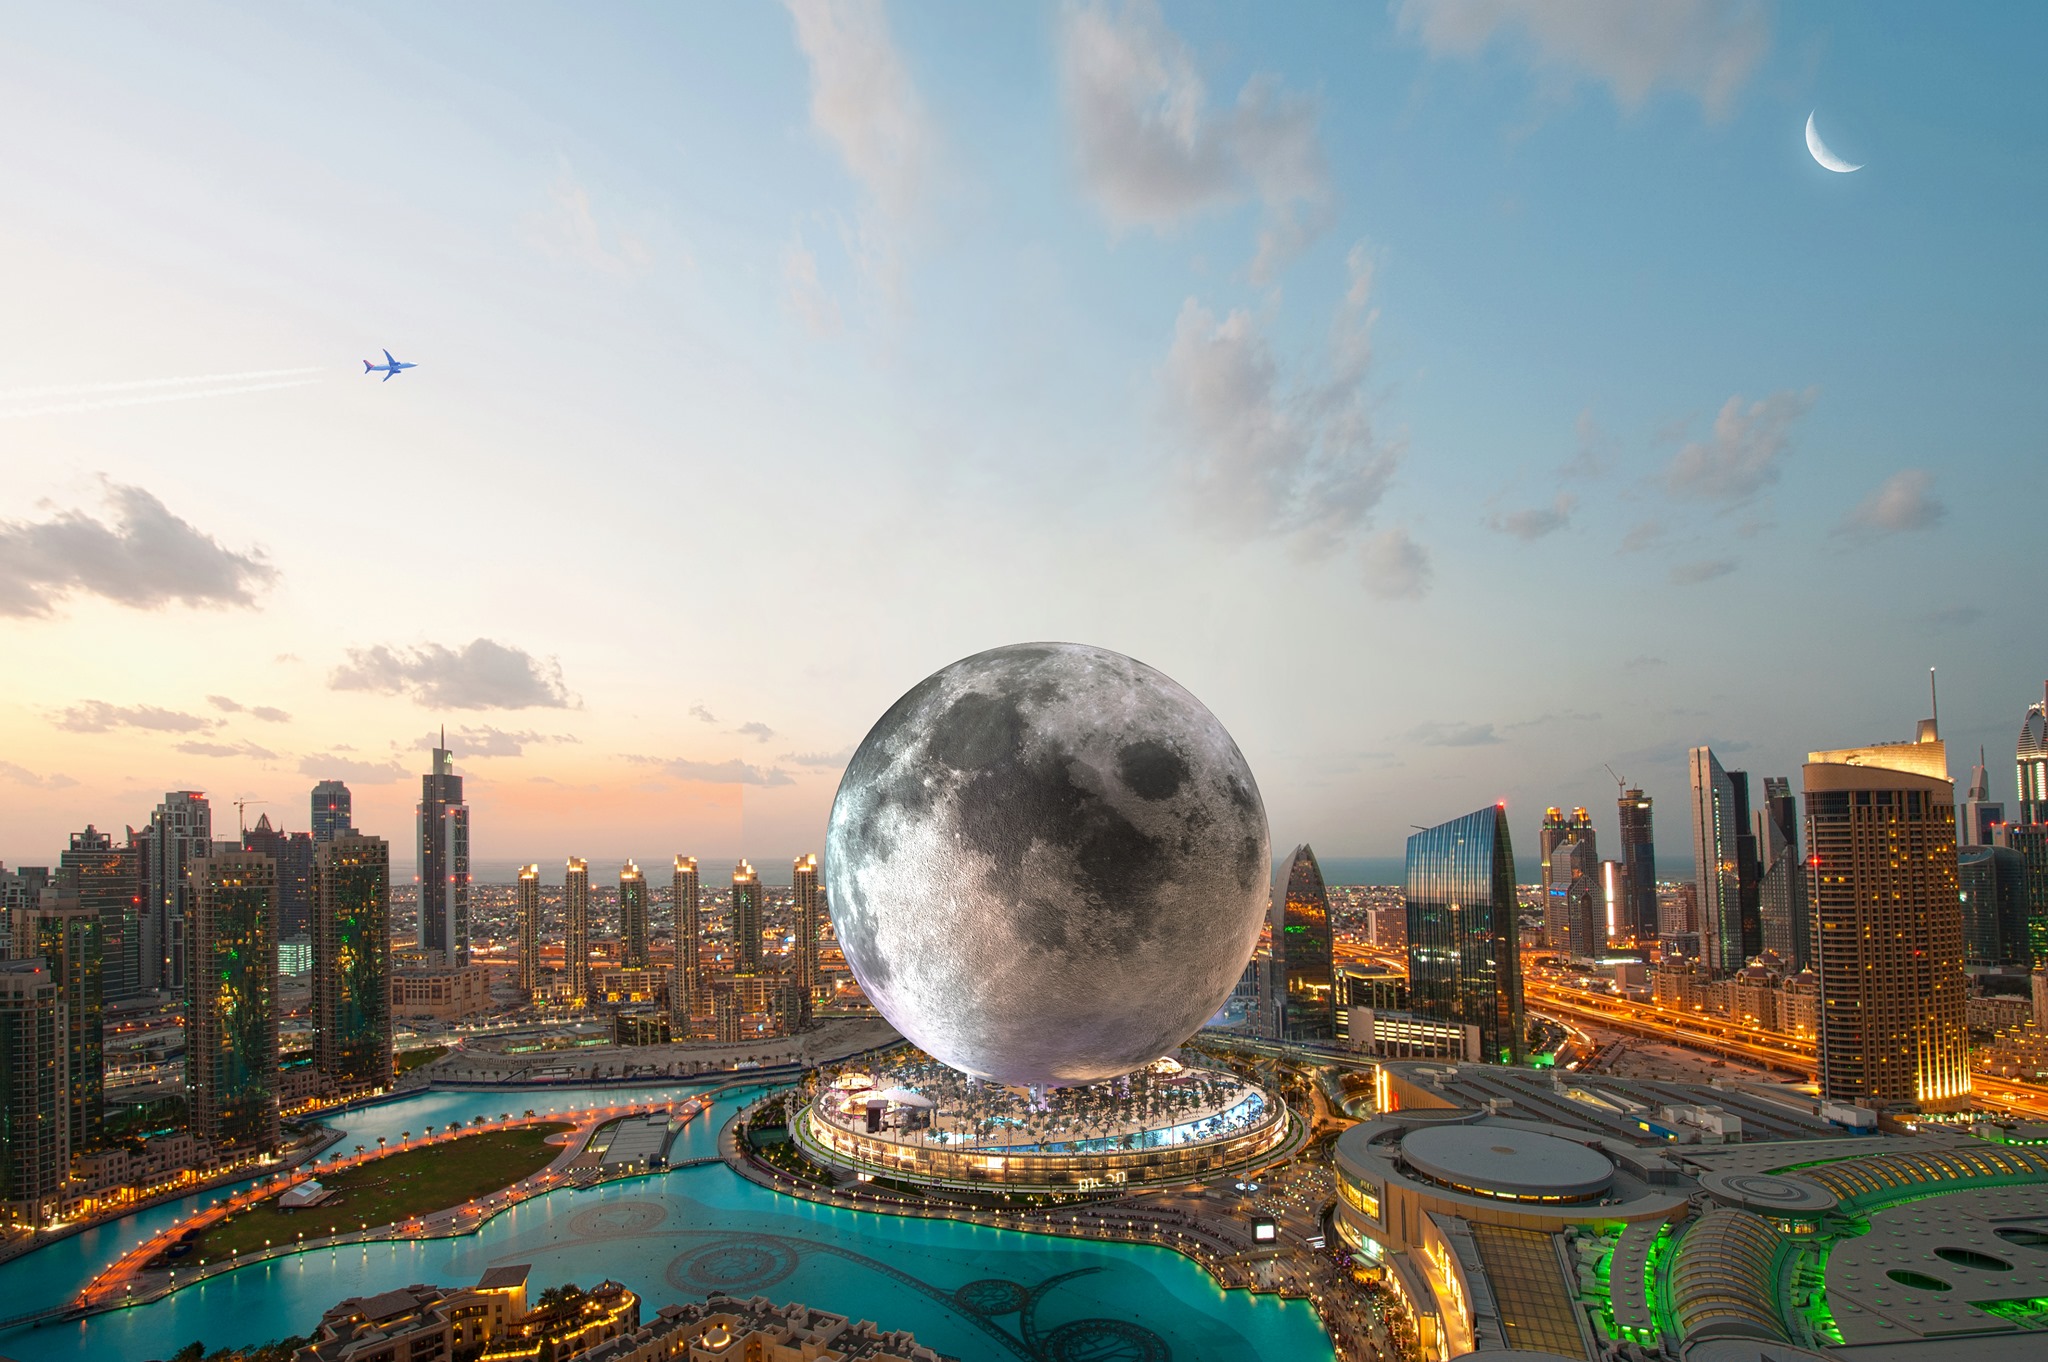 A Moon shaped Luxury Resort in Dubai Building Will Cost A Whopping Rs 40000 crore